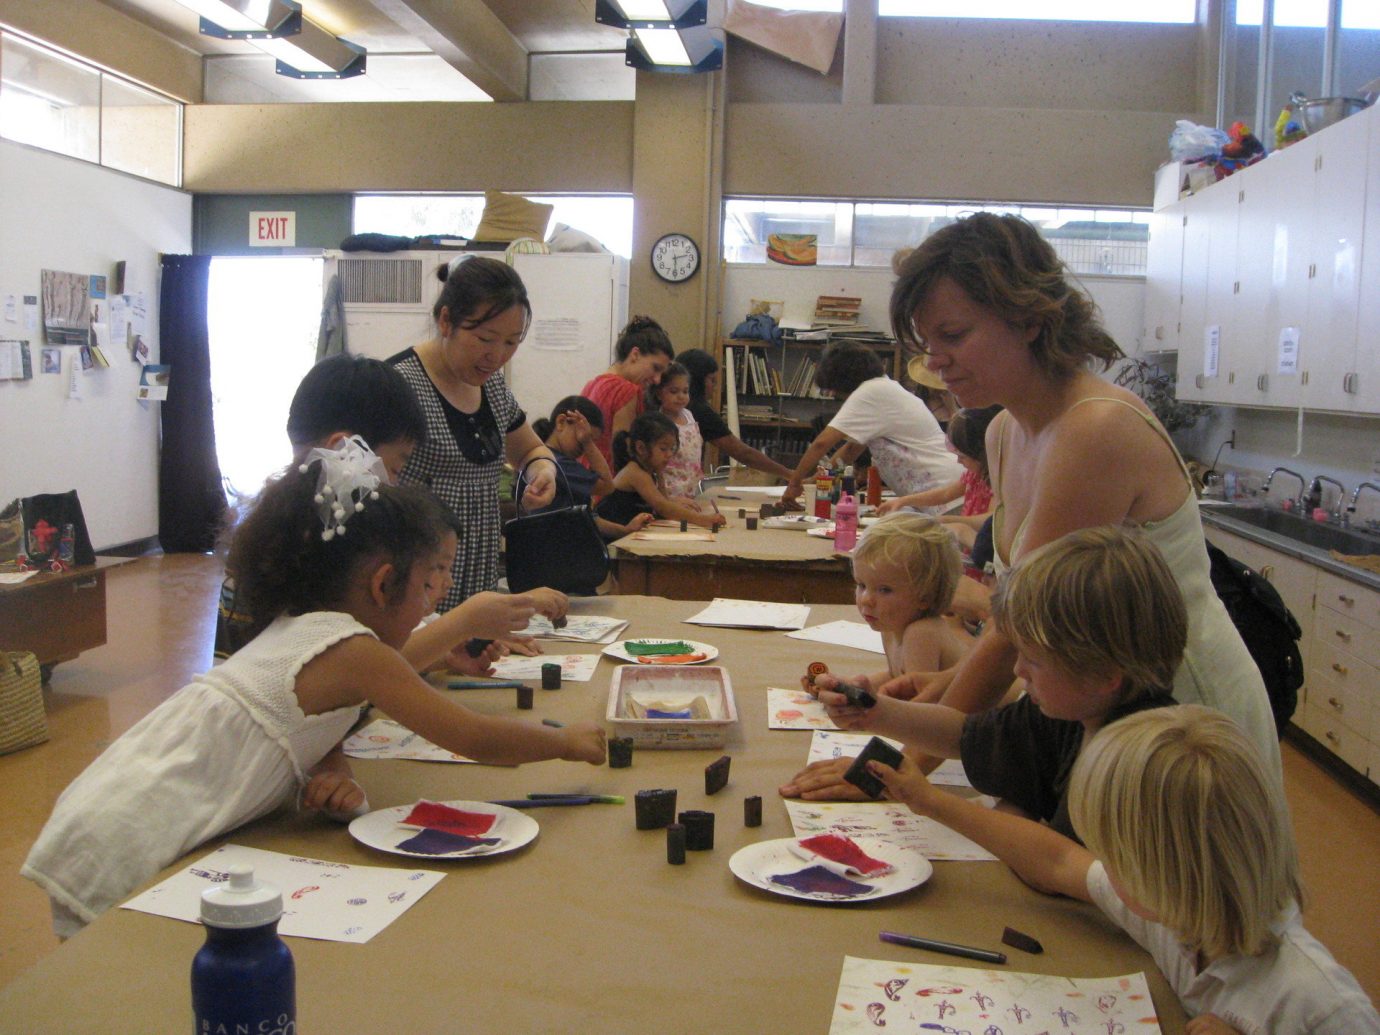 activities art Budget children class crafts painting people person indoor group workshop learning